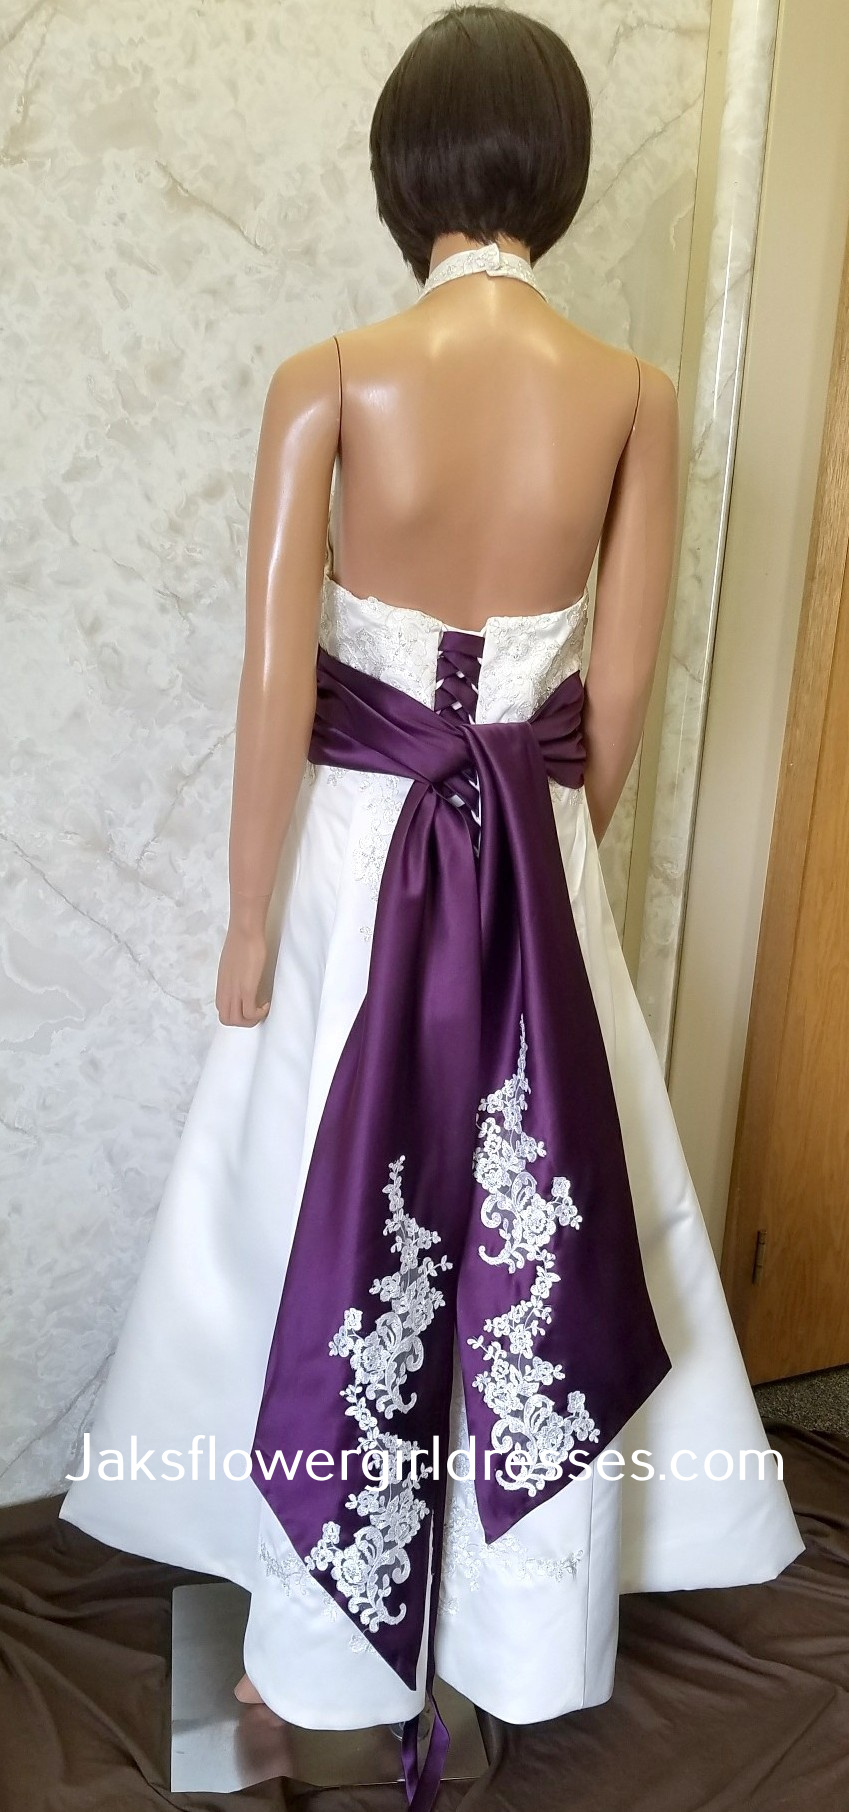 Wedding Dresses With Purple Accents 8813